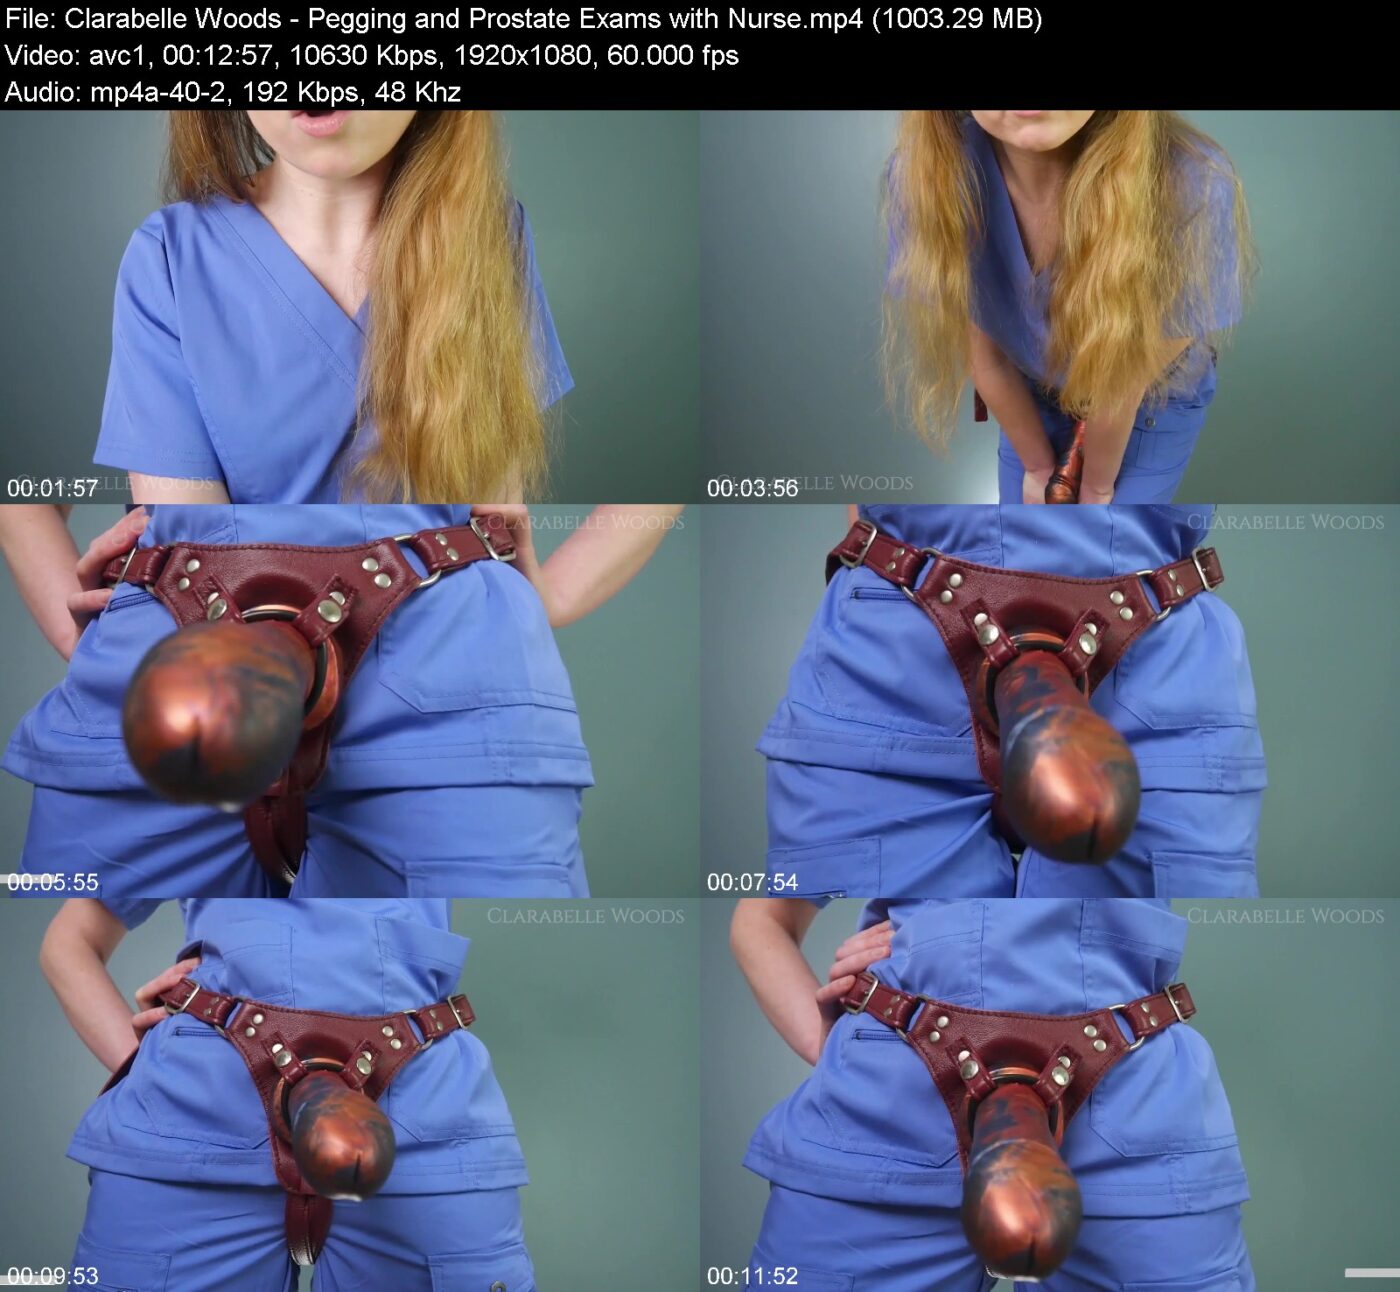 Actress: Clarabelle Woods. Title and Studio: Pegging and Prostate Exams with Nurse